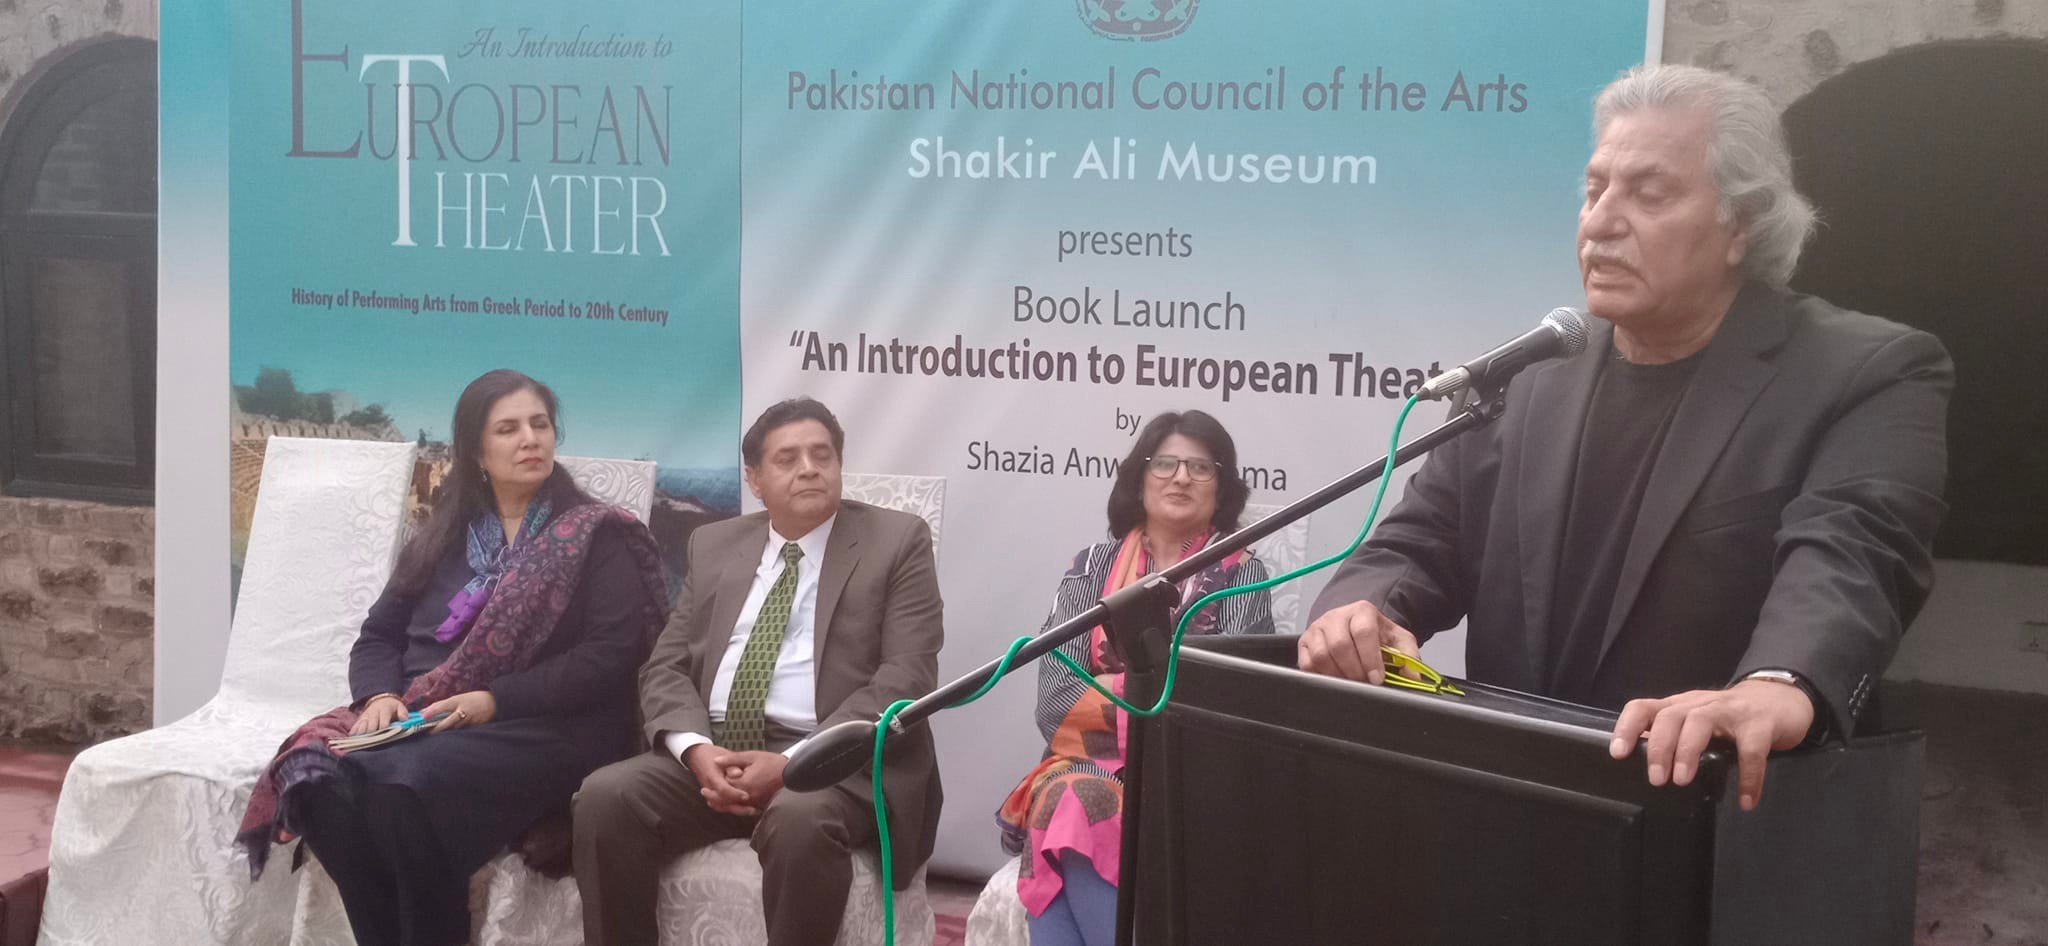 Book Launching Ceremony at Shakir Ali Museum: The role of Theatre is imperative in any peaceful society, says Usman Pirzaada